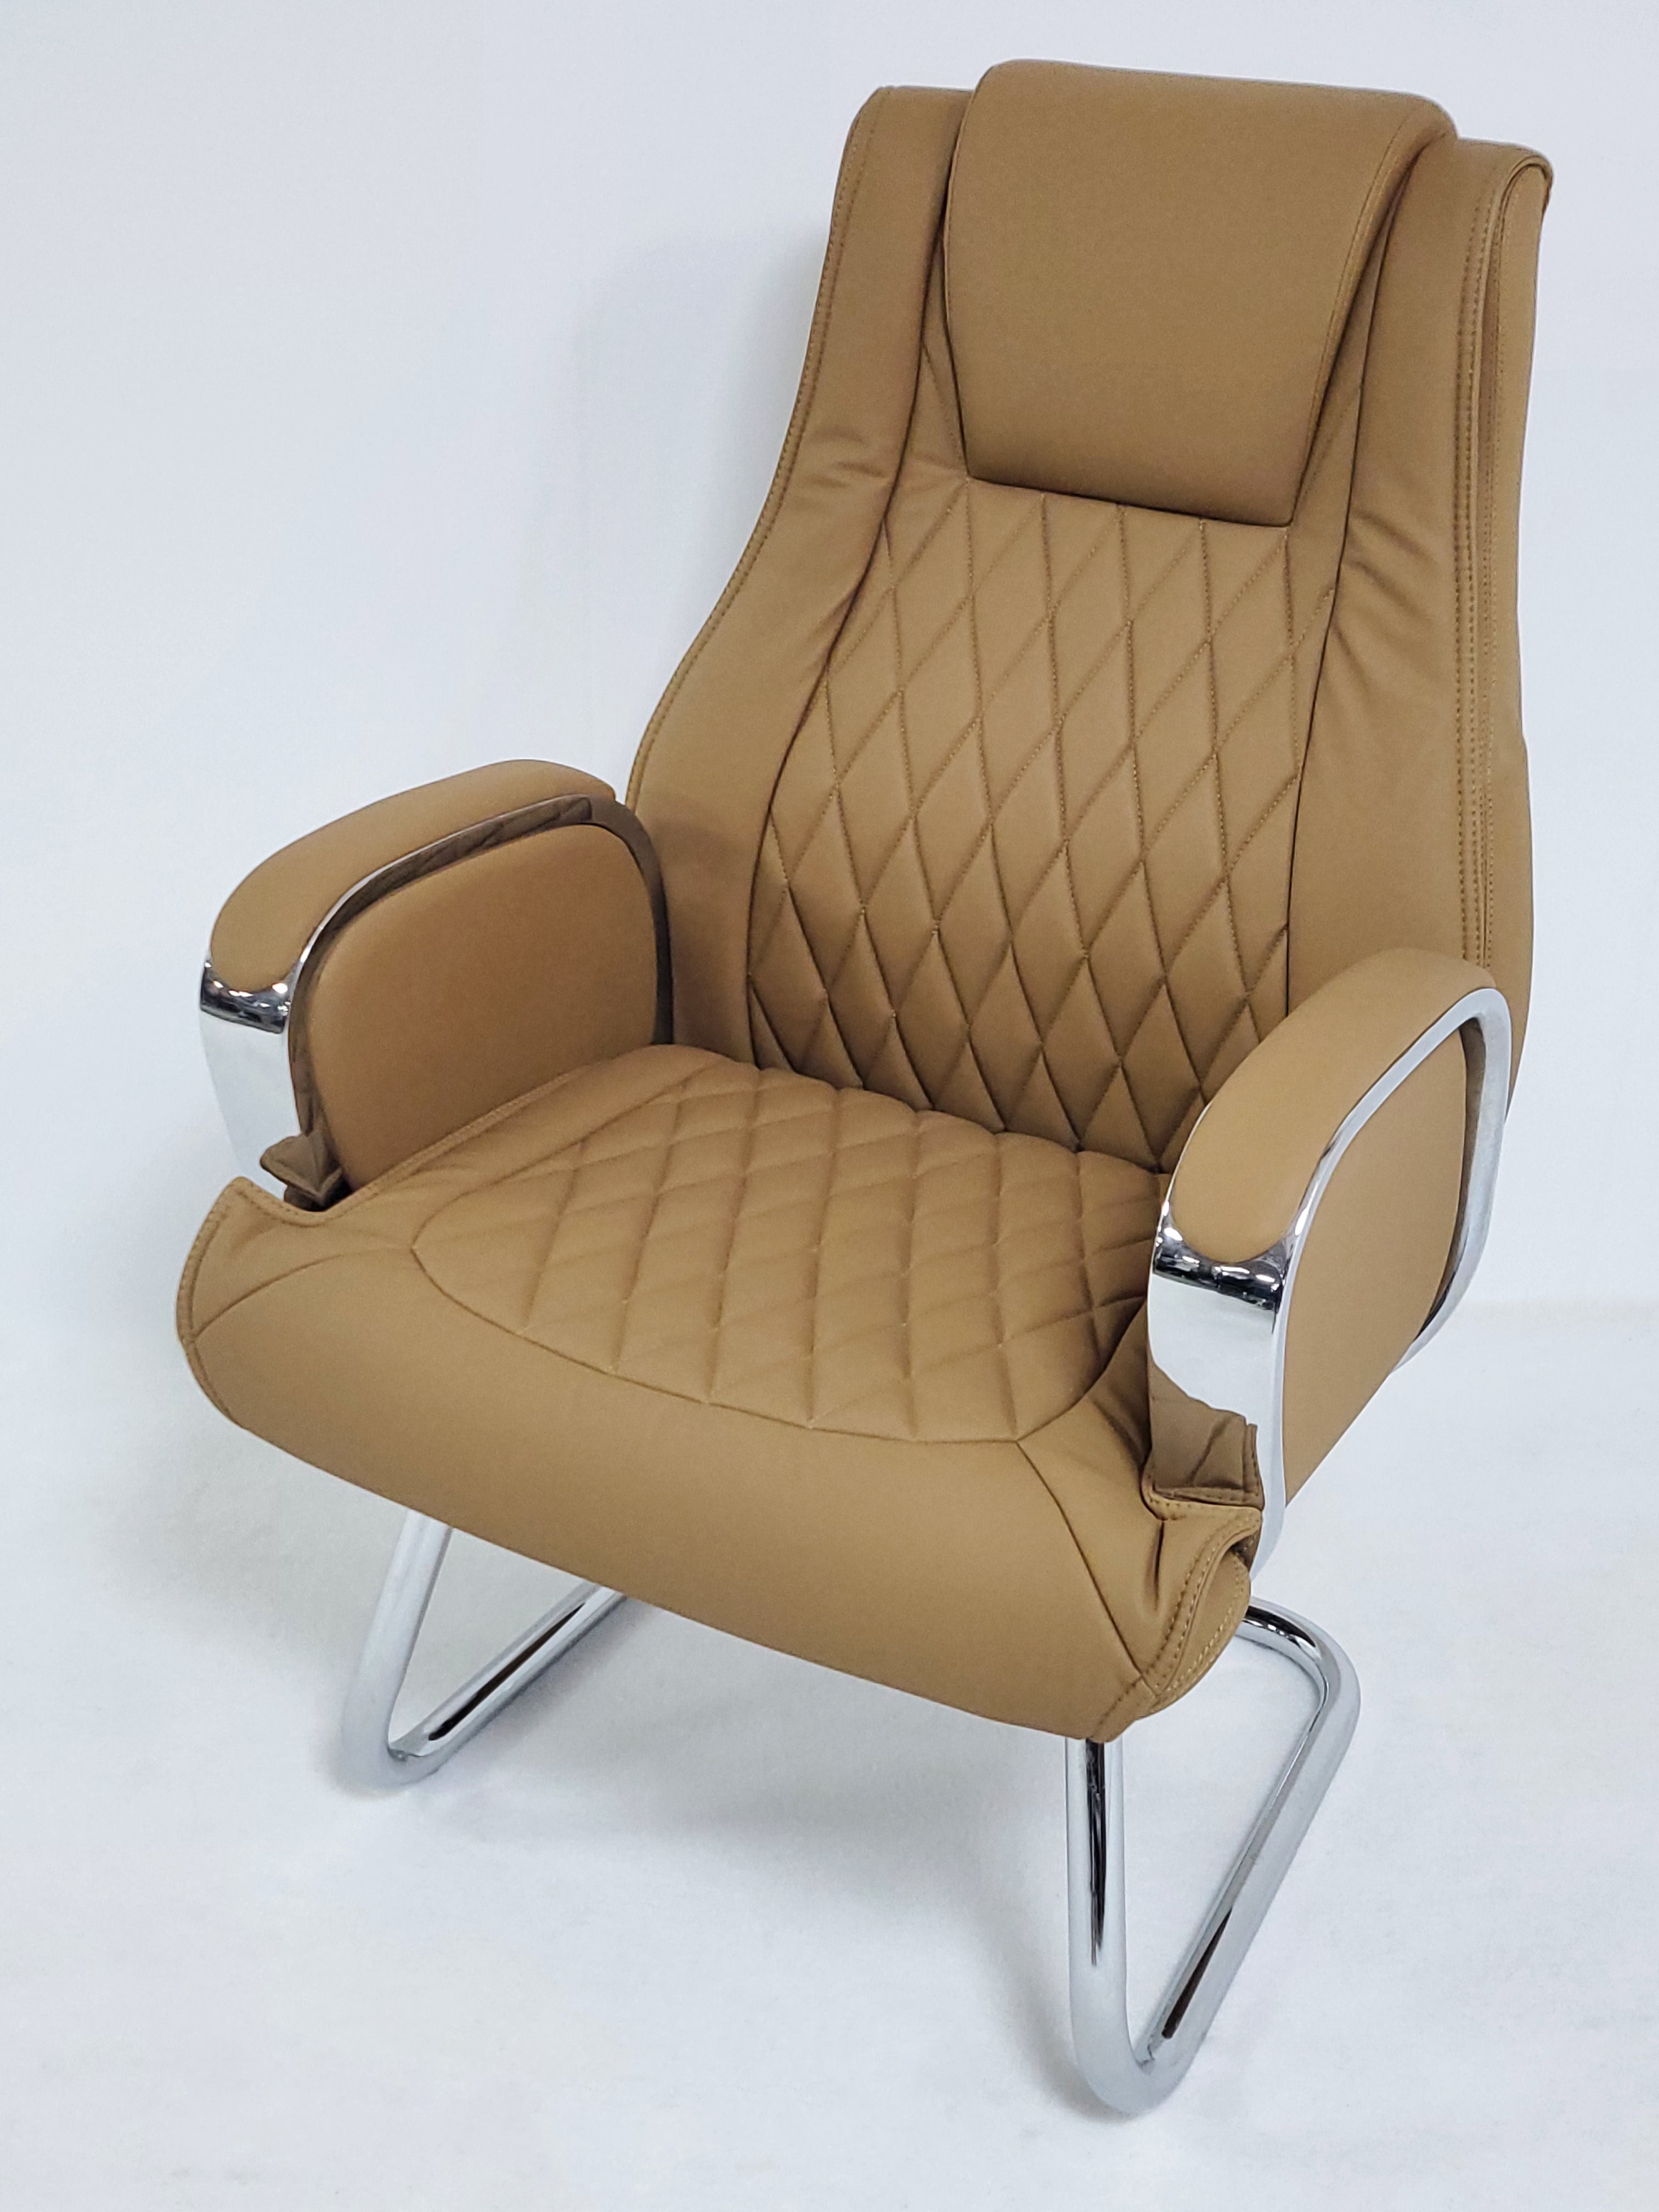 Heavy Duty Modern Beige Leather Visitor Chair with Chrome Arms - CHA-1202C North Yorkshire